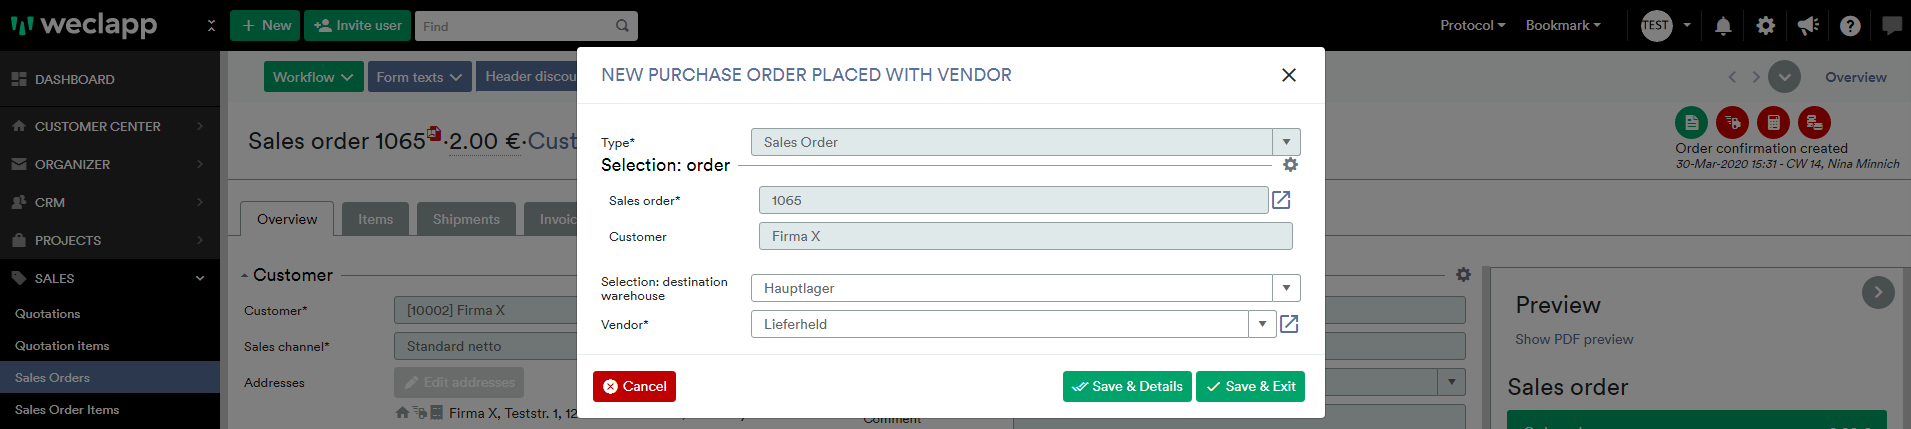 Sales order new purchase order